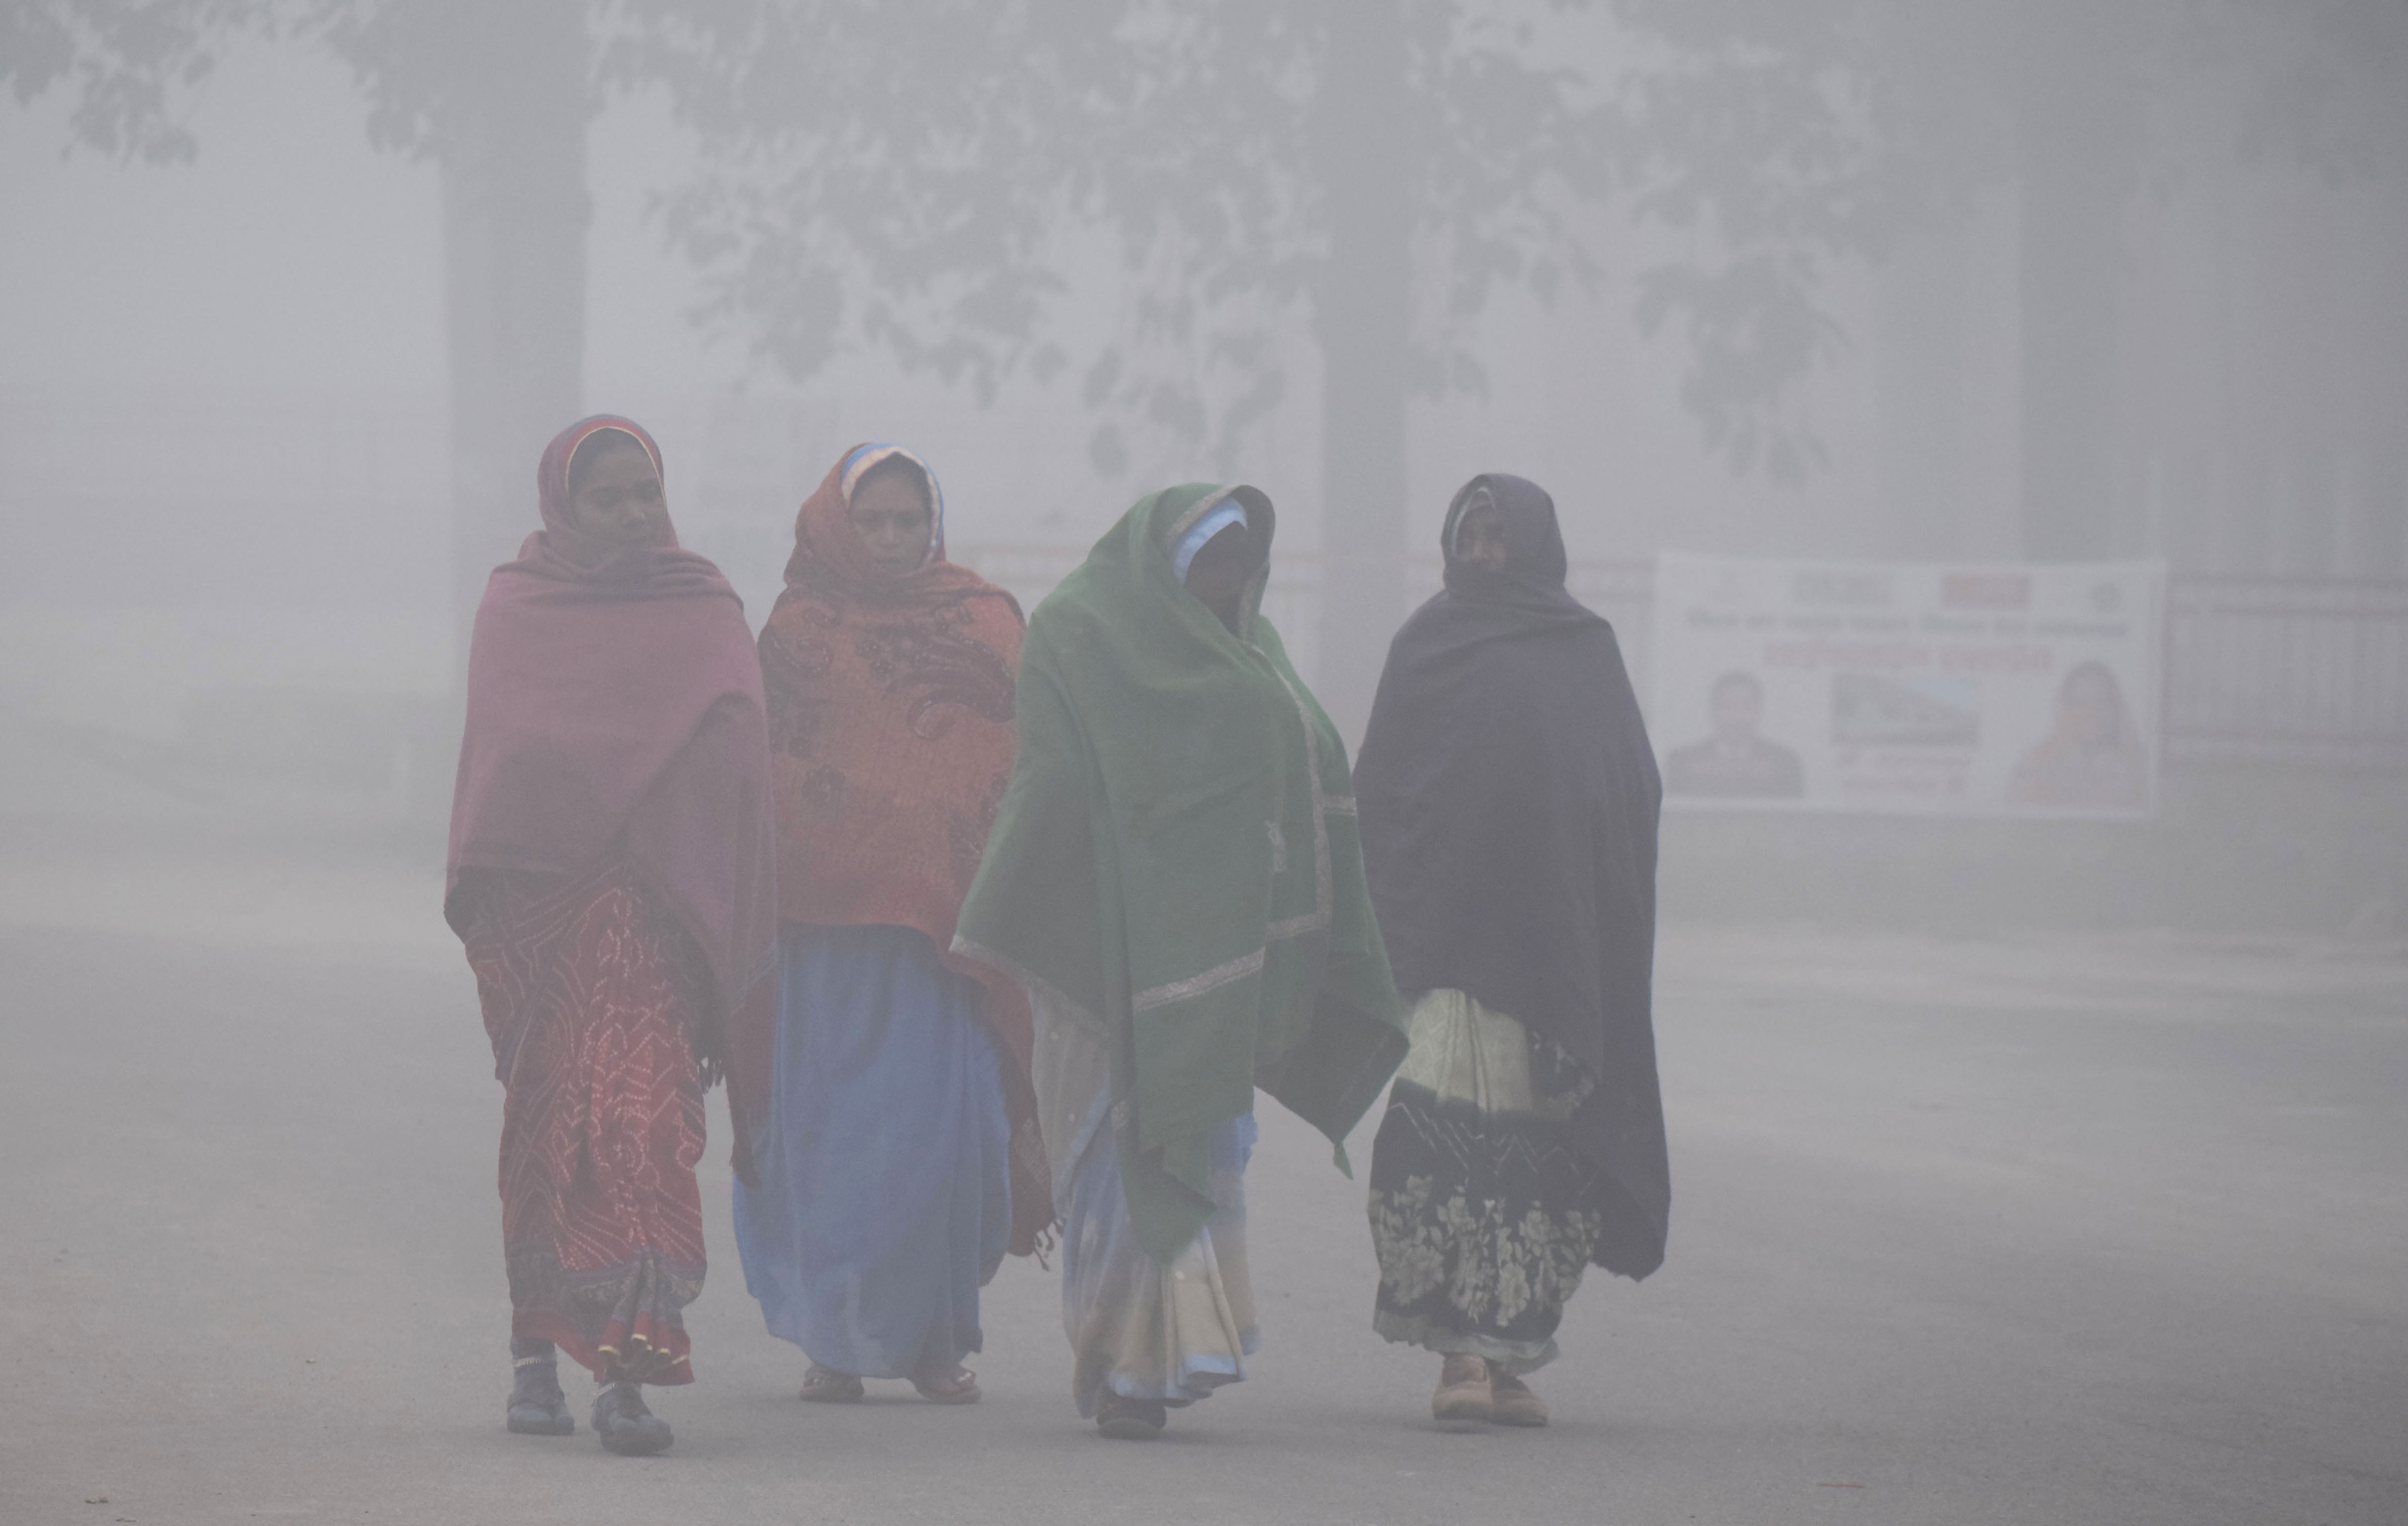 Odisha sees temperature drop, cold waves expected in next 2-3 days